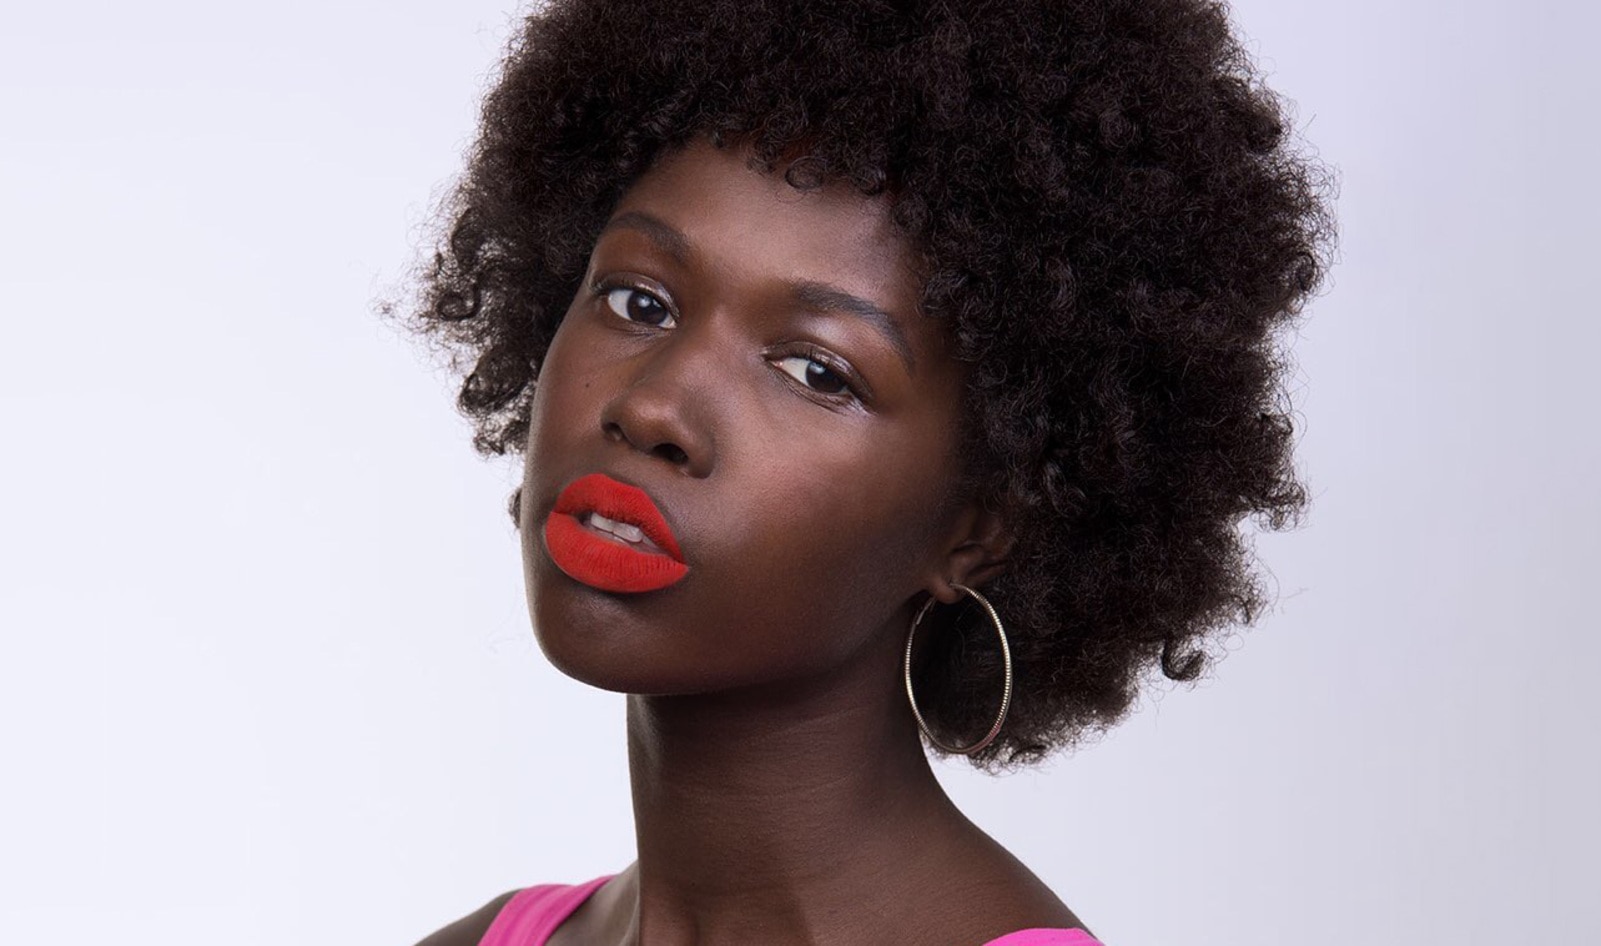 You Can Now Buy a Vegan Lipstick to Support the Black Lives Matter Movement